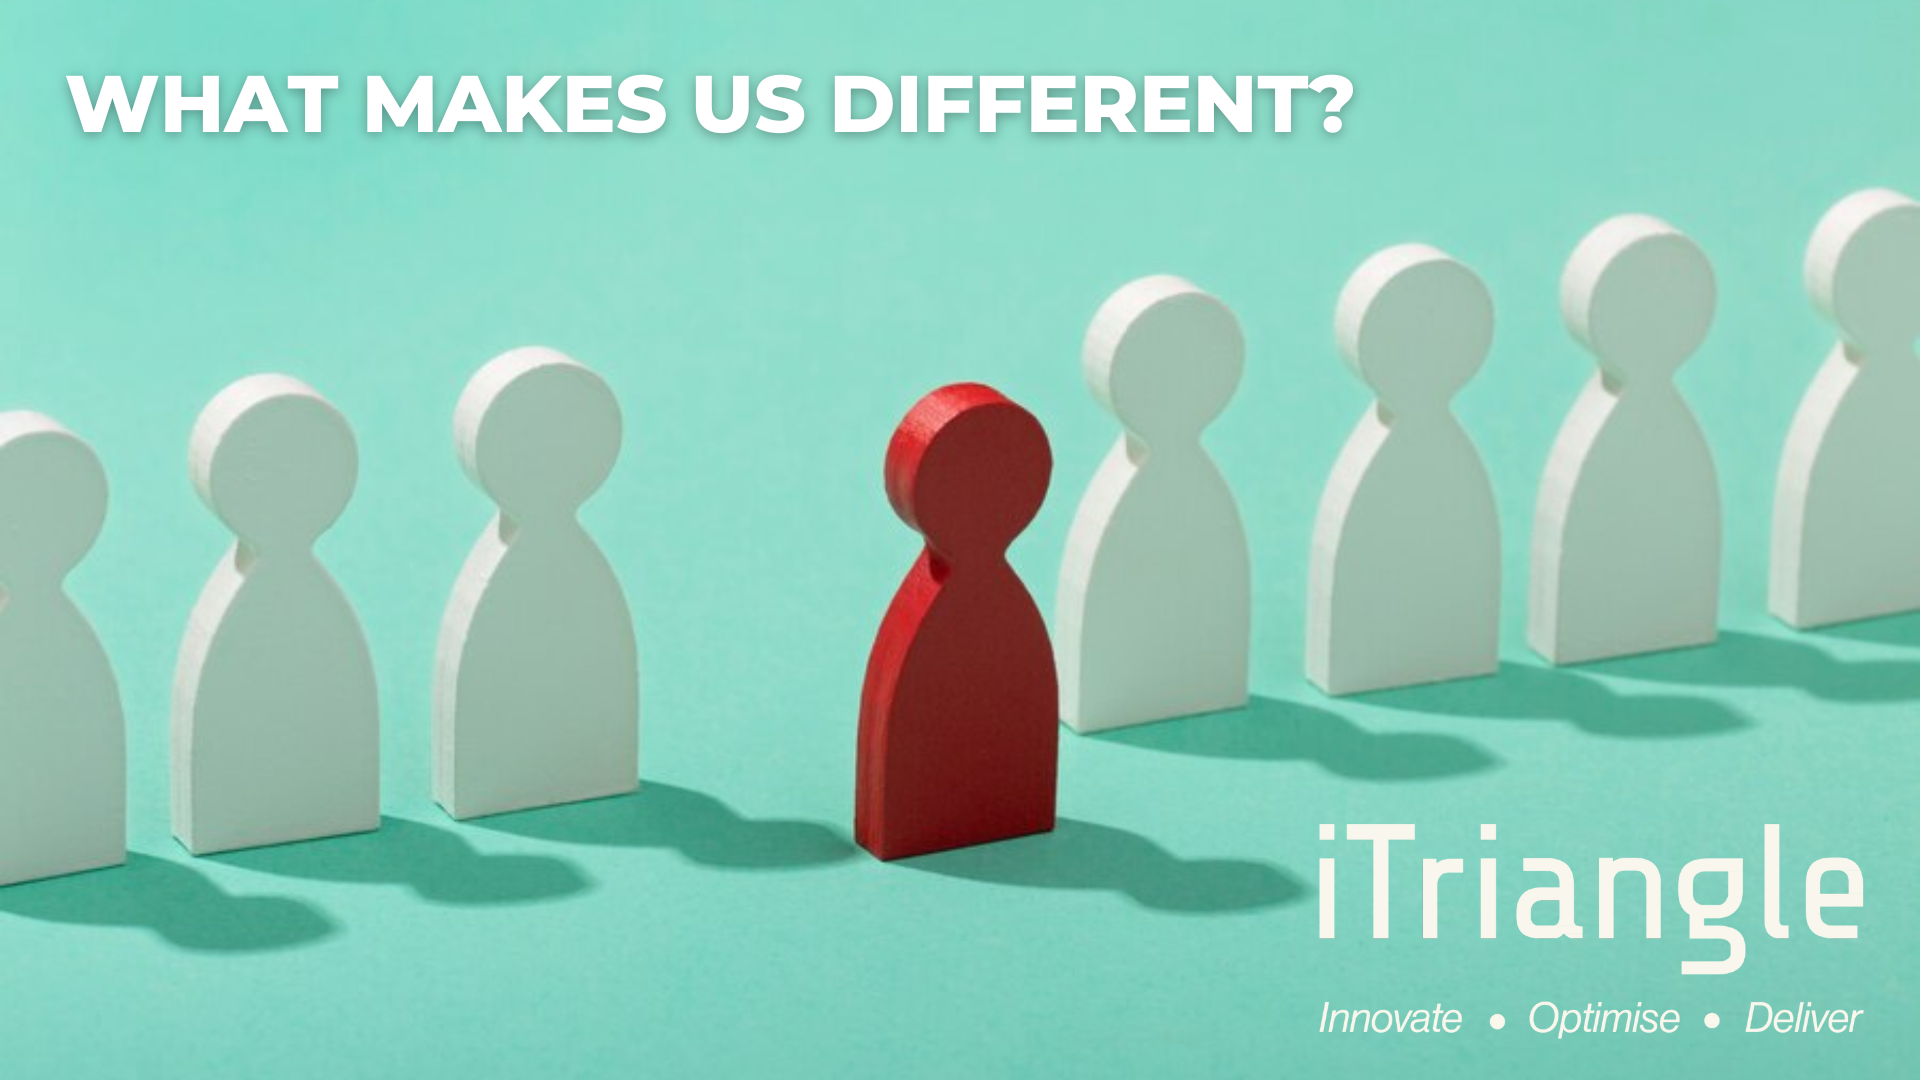 What Makes iTriangle Different?